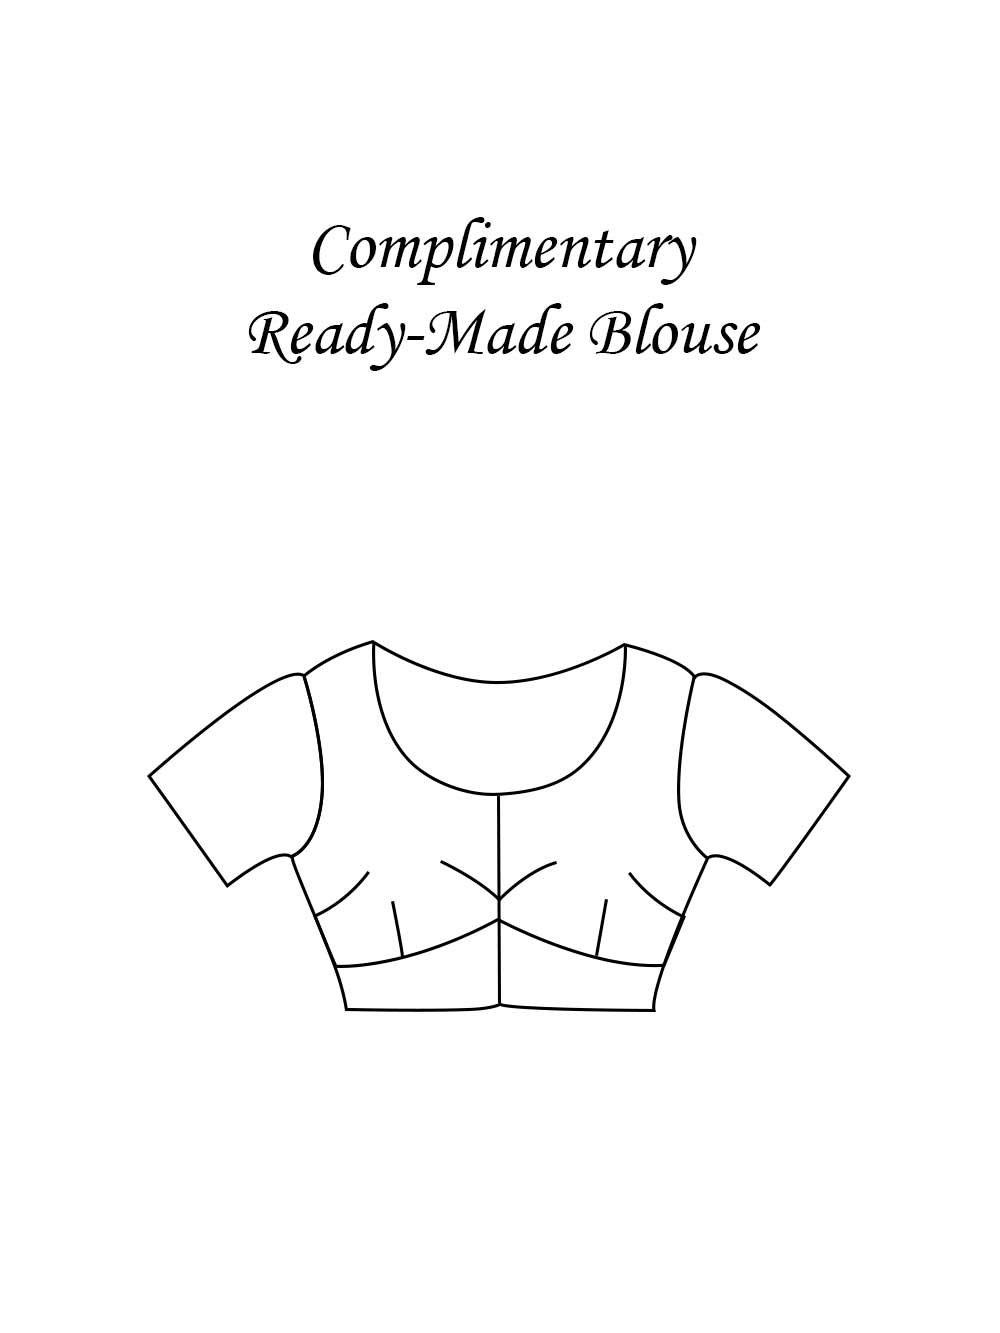 Complimentary Readymade Blouse